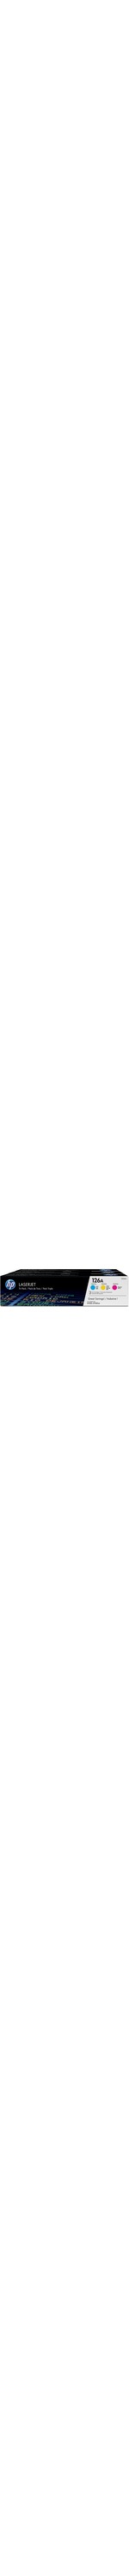 HP 126A Toner Cartridge - Assorted - Laser - 1000 Page - 3 / Box